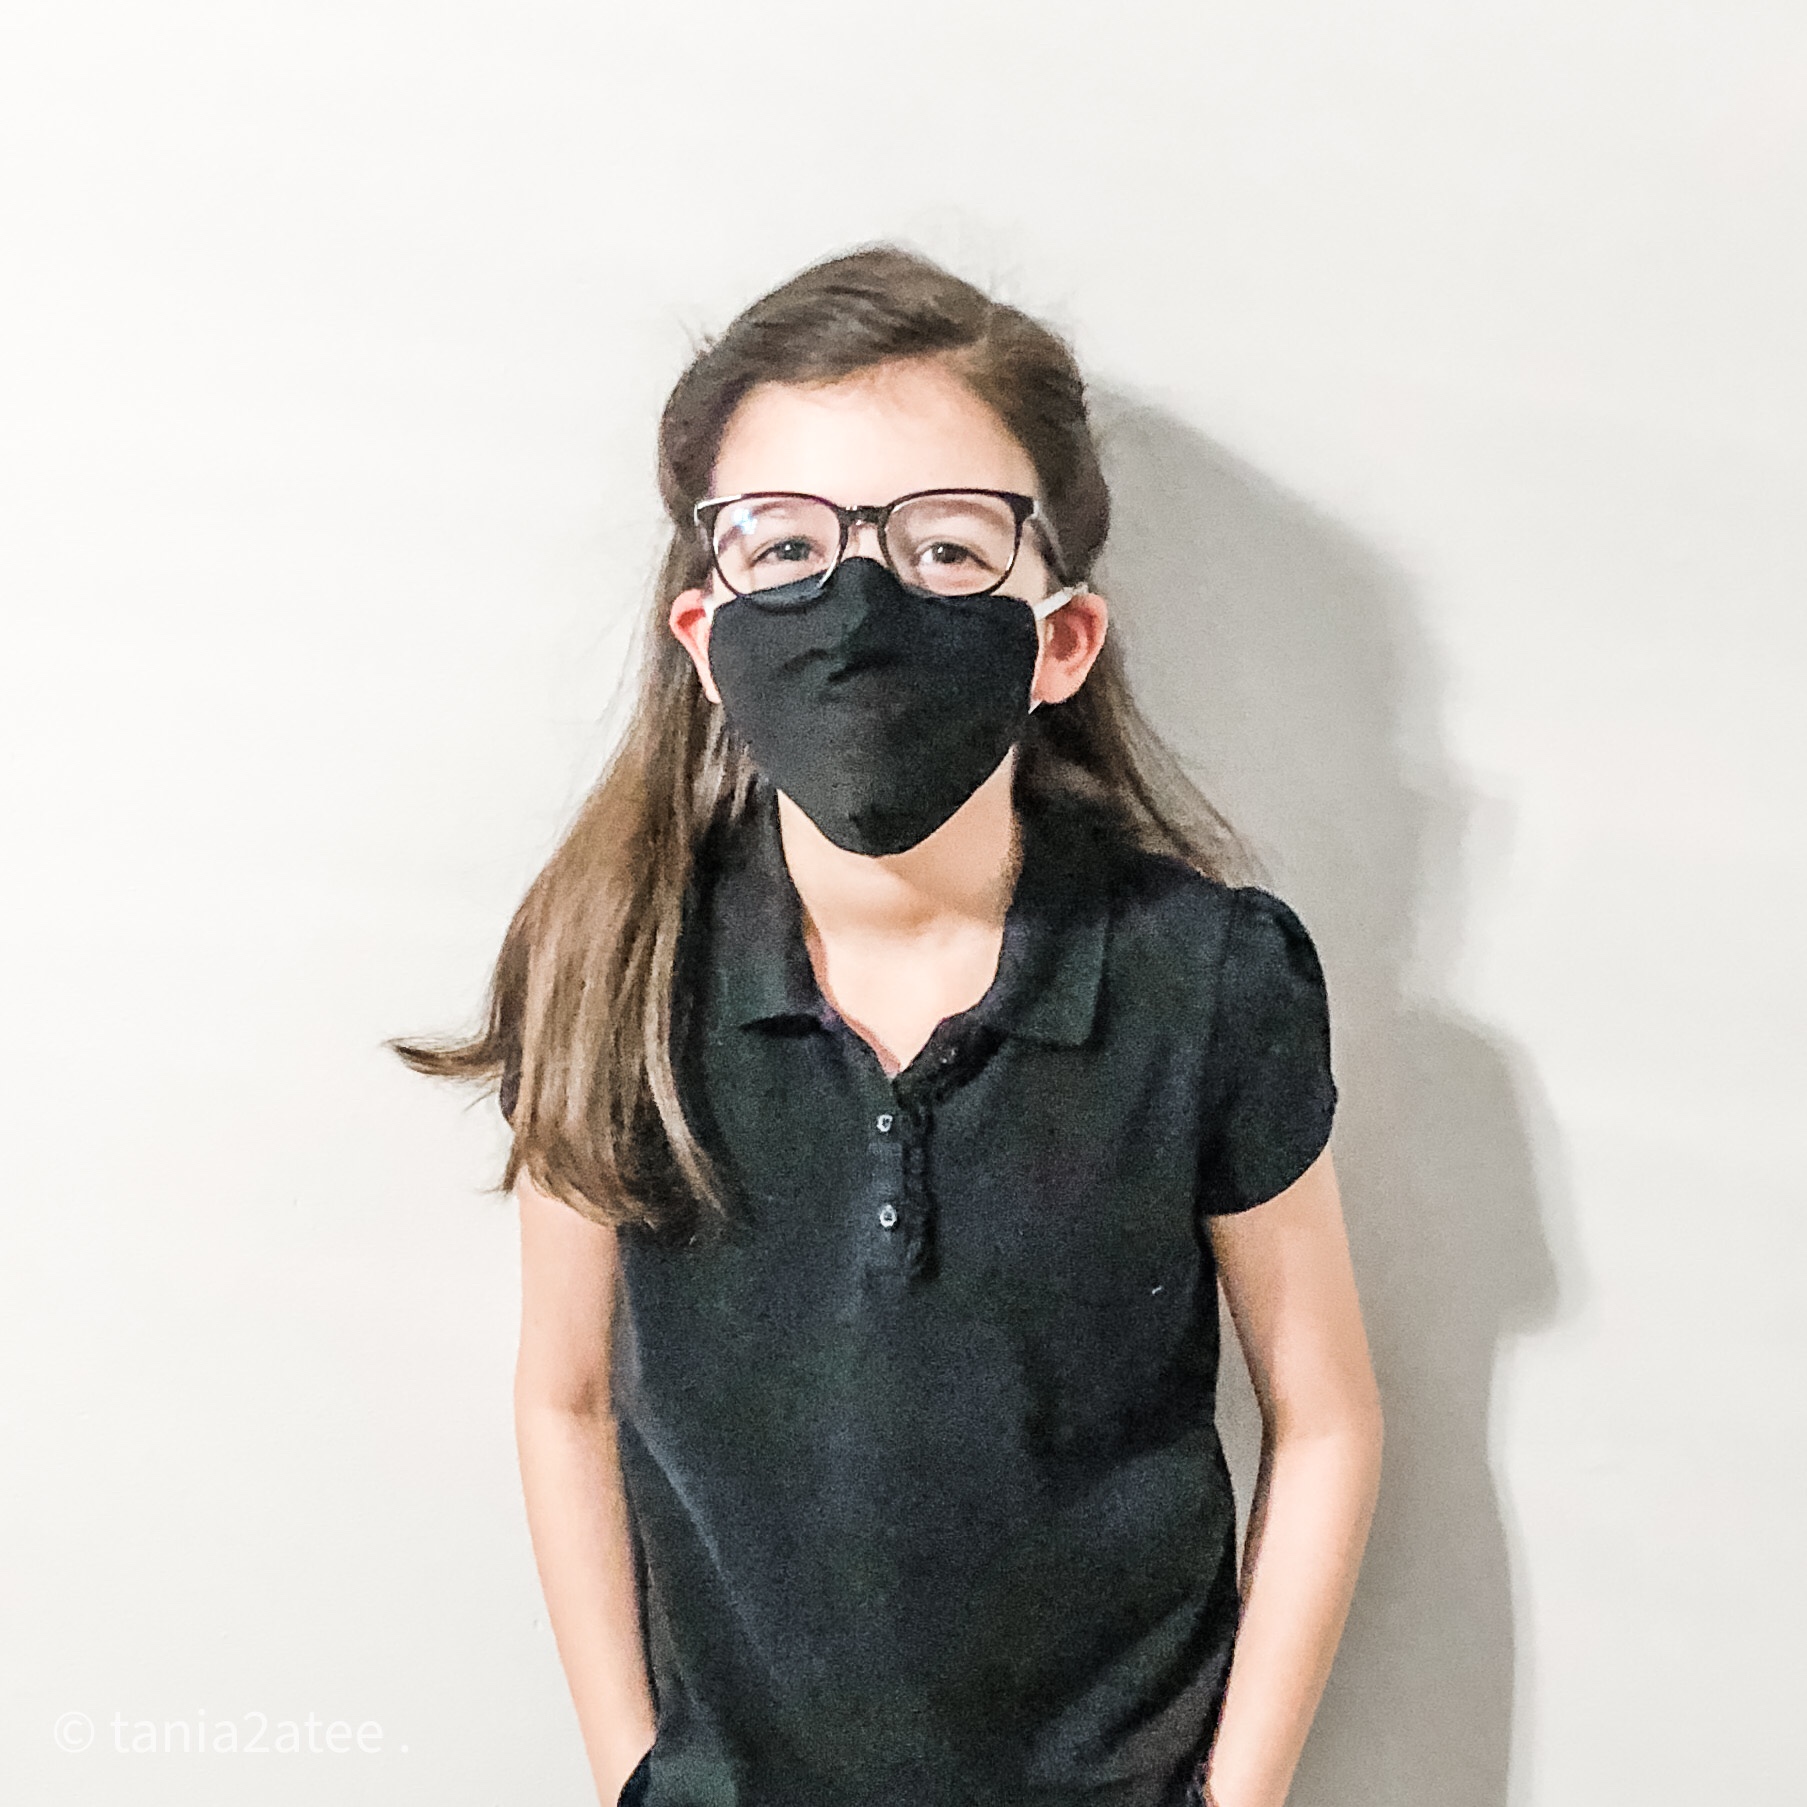 girl posing for camera with hands in her pockets wearing black top and pants, glasses and black face mask